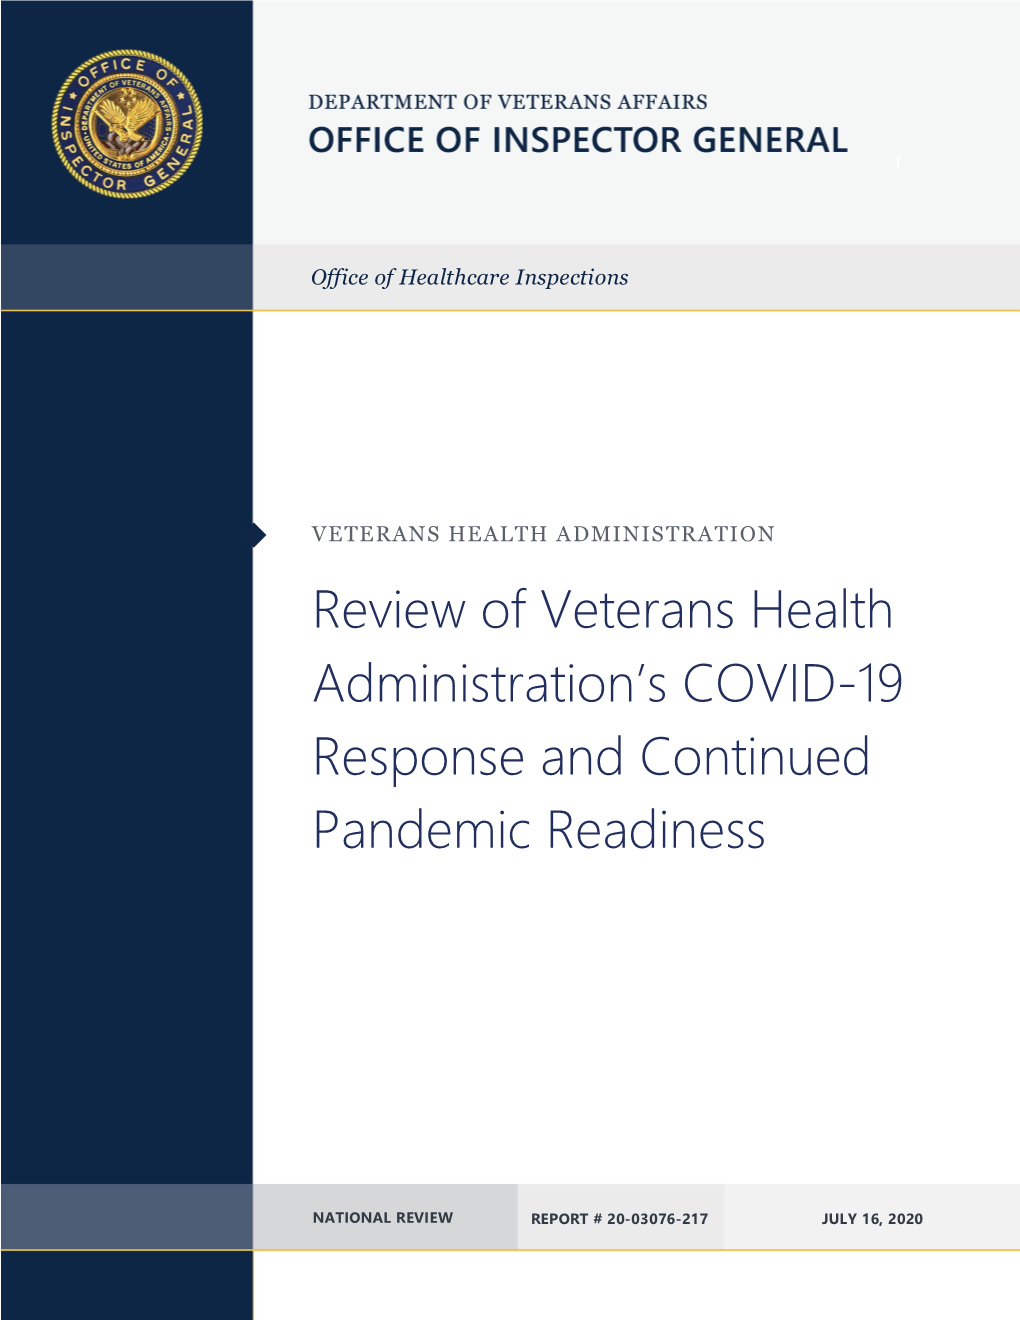 Review of Veterans Health Administration's COVID-19